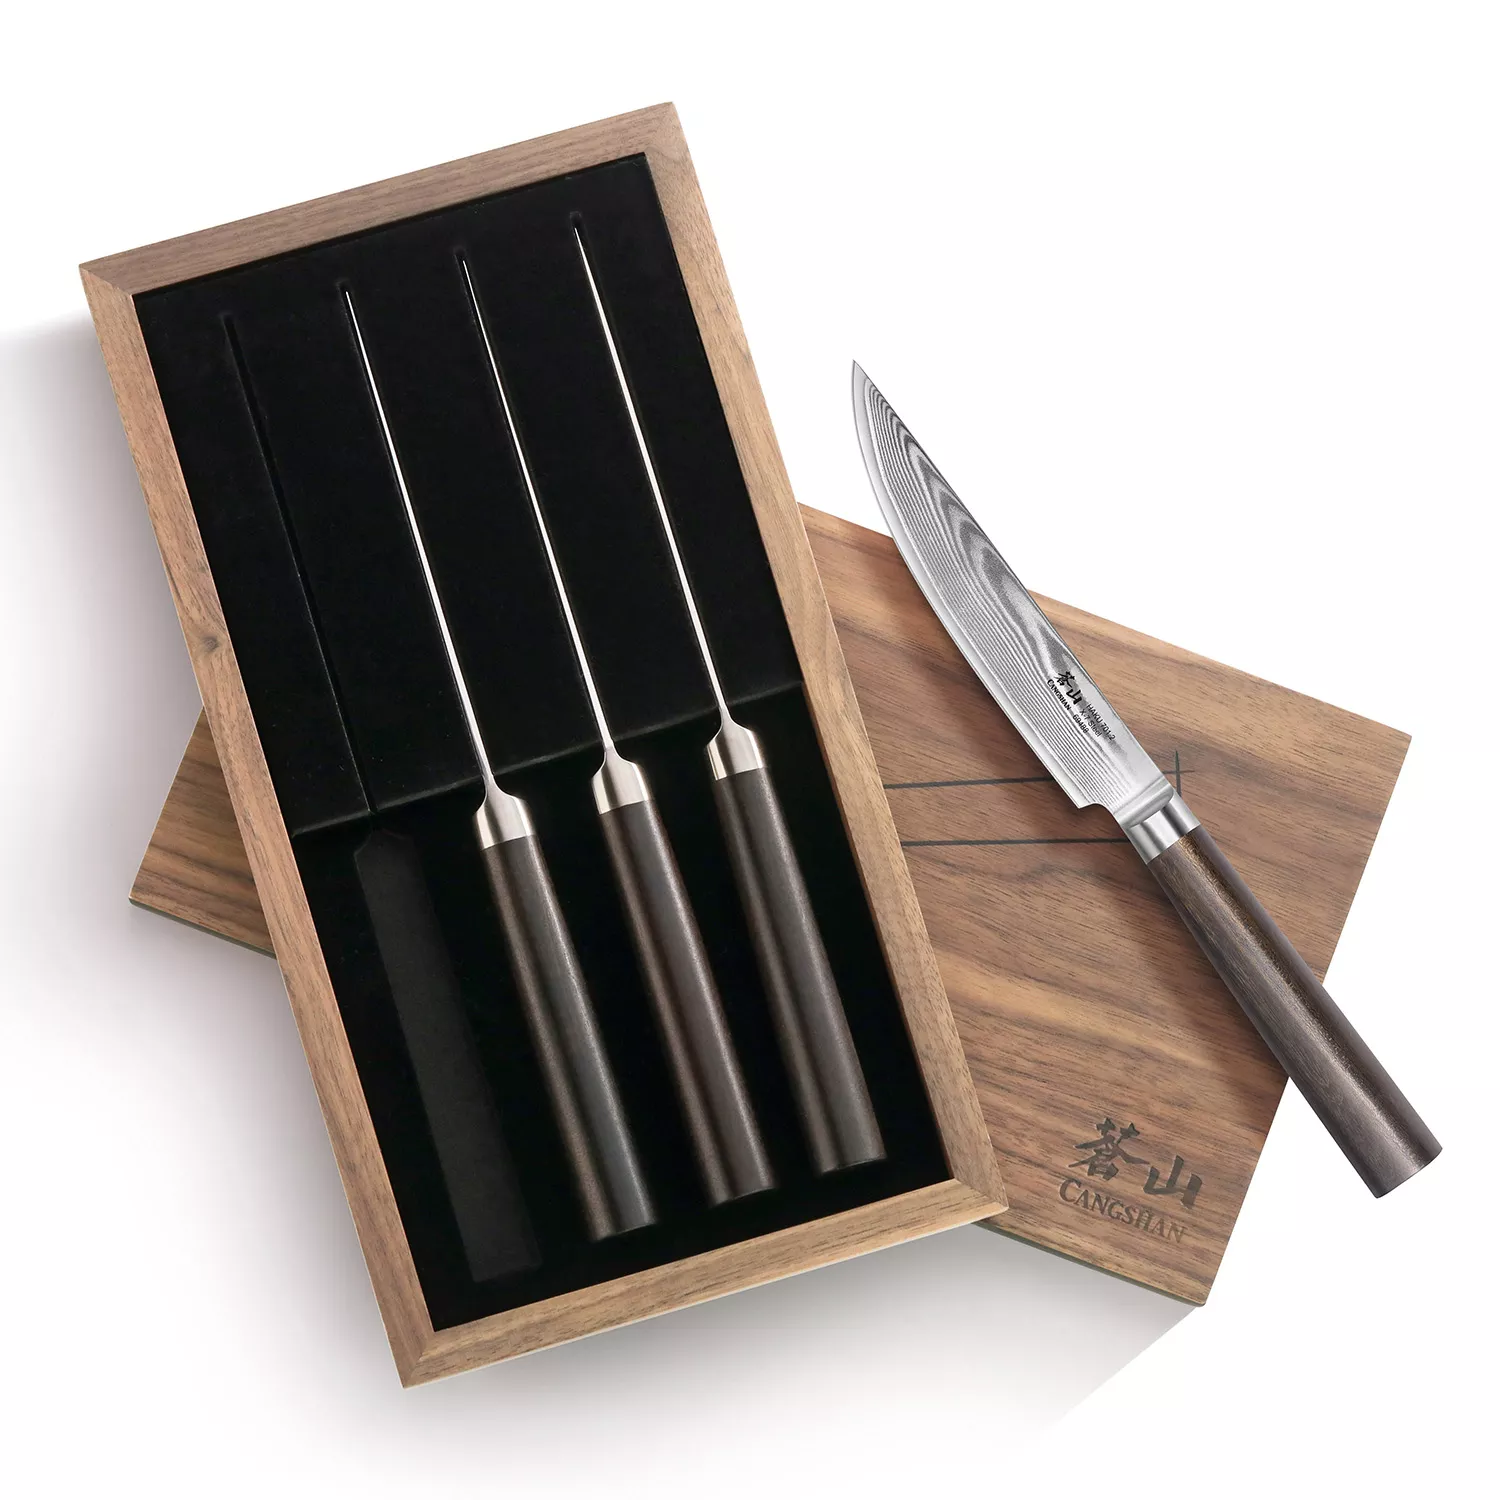 Smokin' and Grillin' with AB Signature Japanese Damascus Steel Knife Set of 2